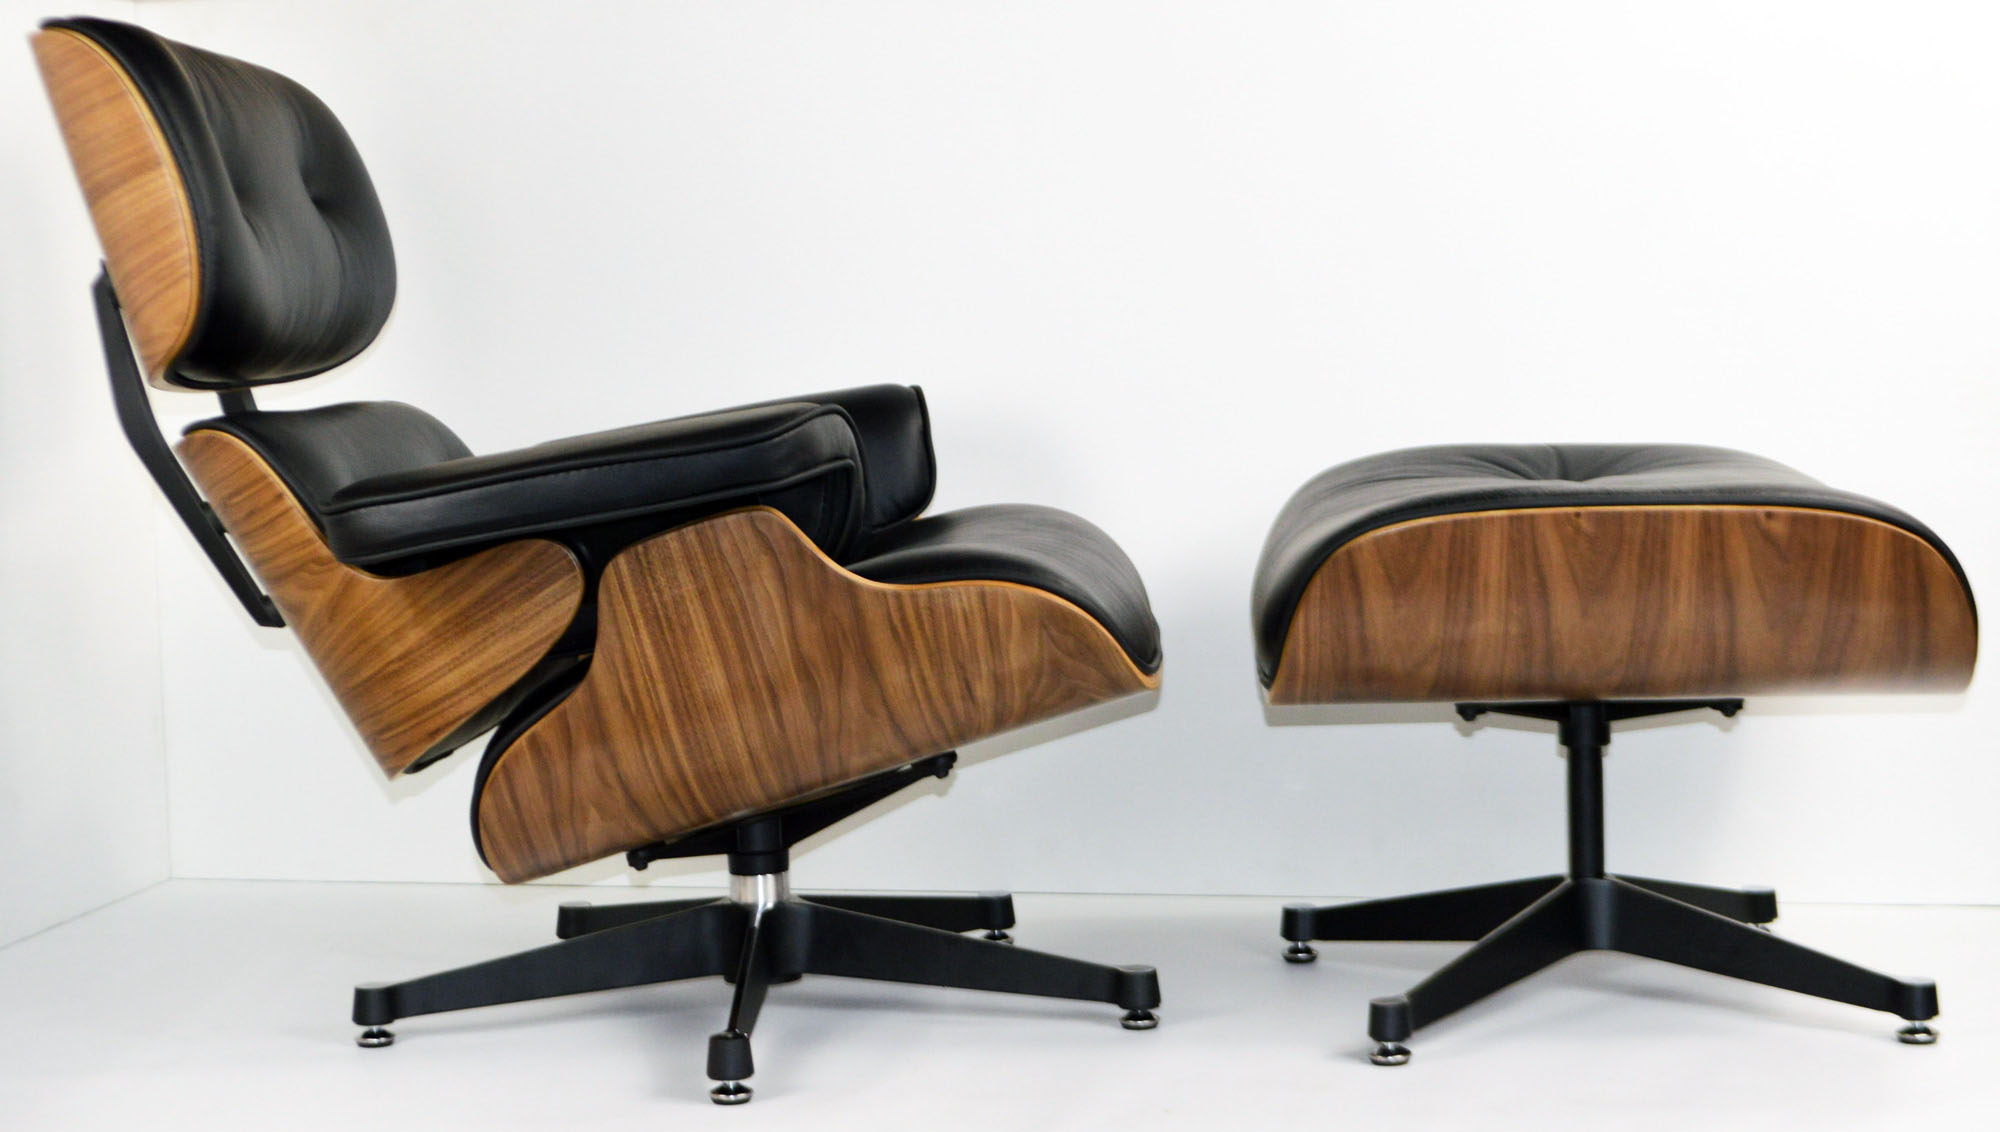 Charles Eames Chair Walnut Black, Eames Leather Lounge Chair